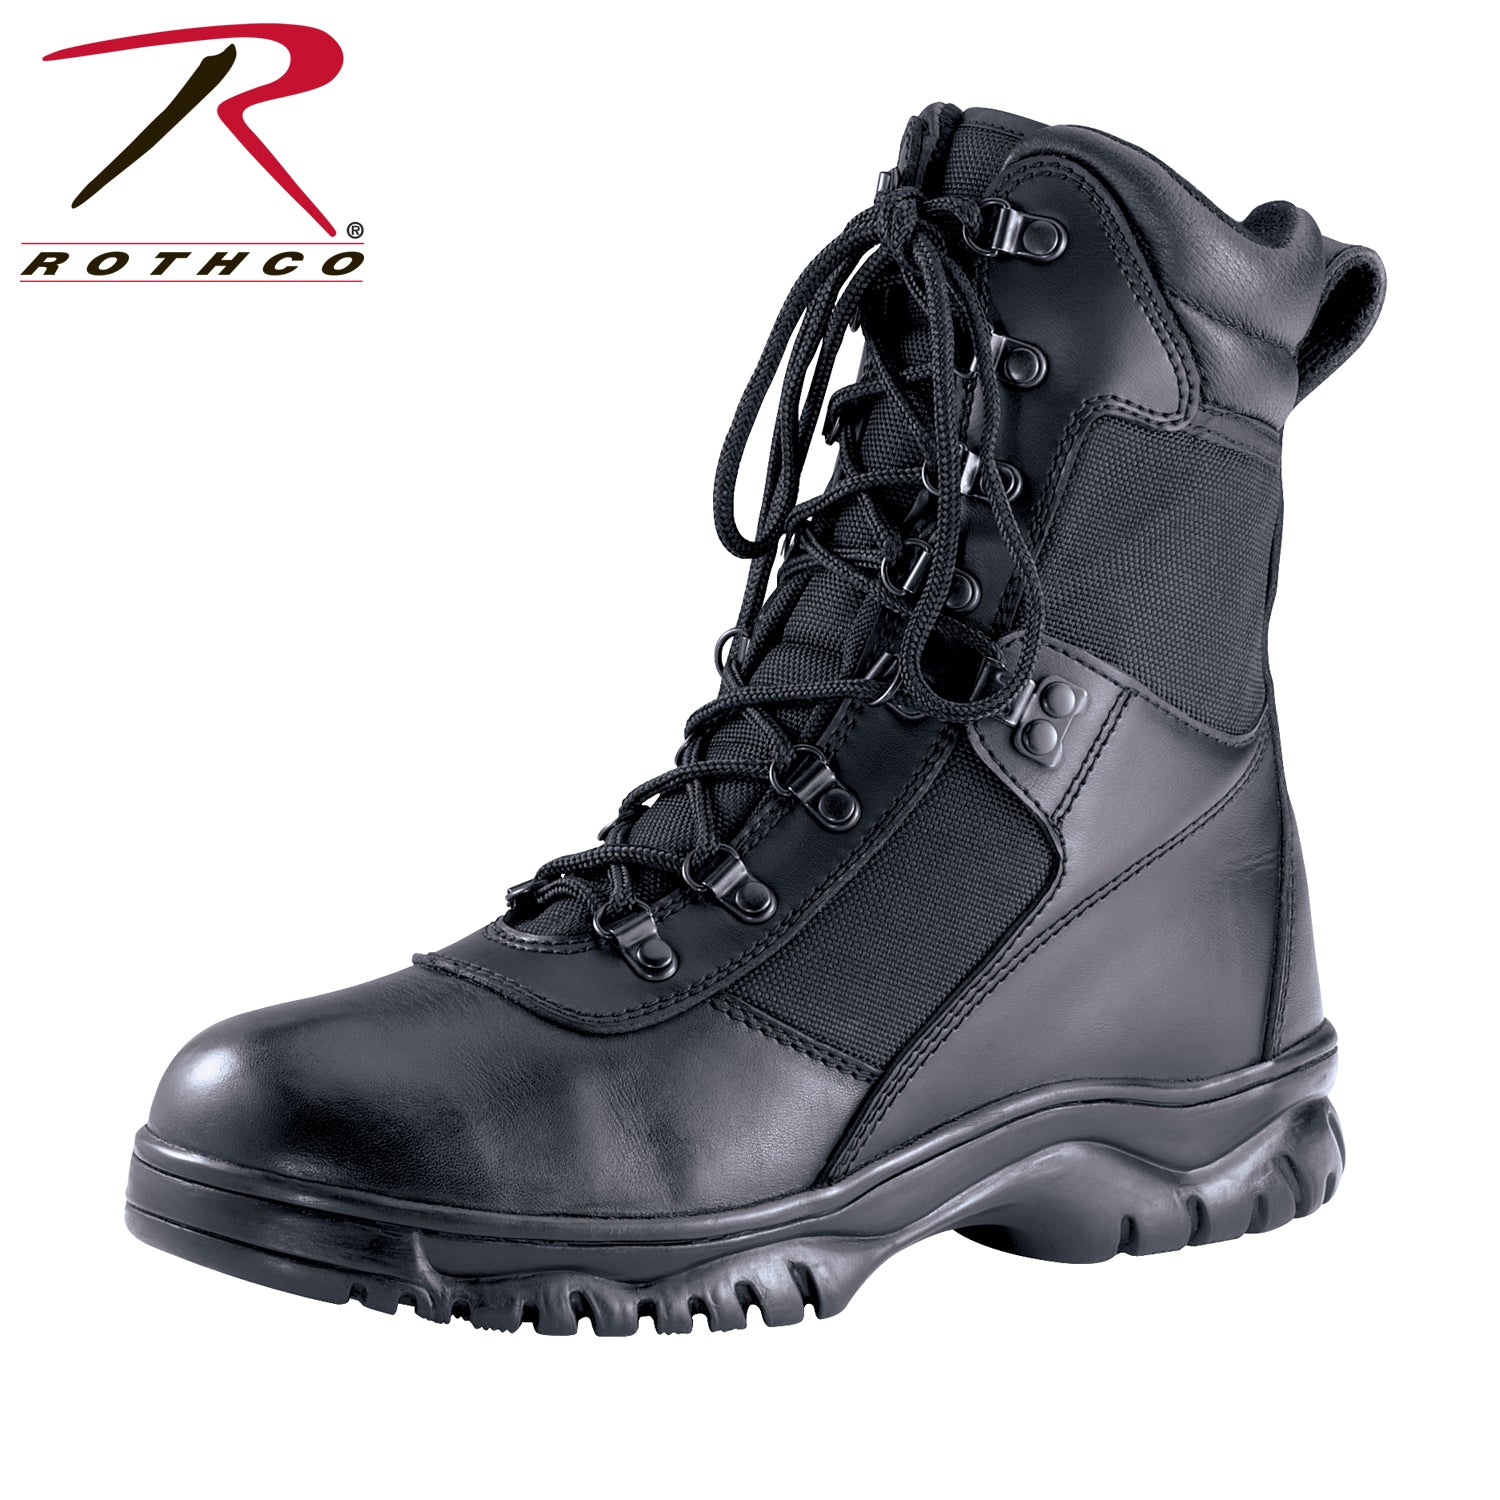 Rothco 8" Forced Entry Waterproof Tactical Boot - red-diamond-uniform-police-supply